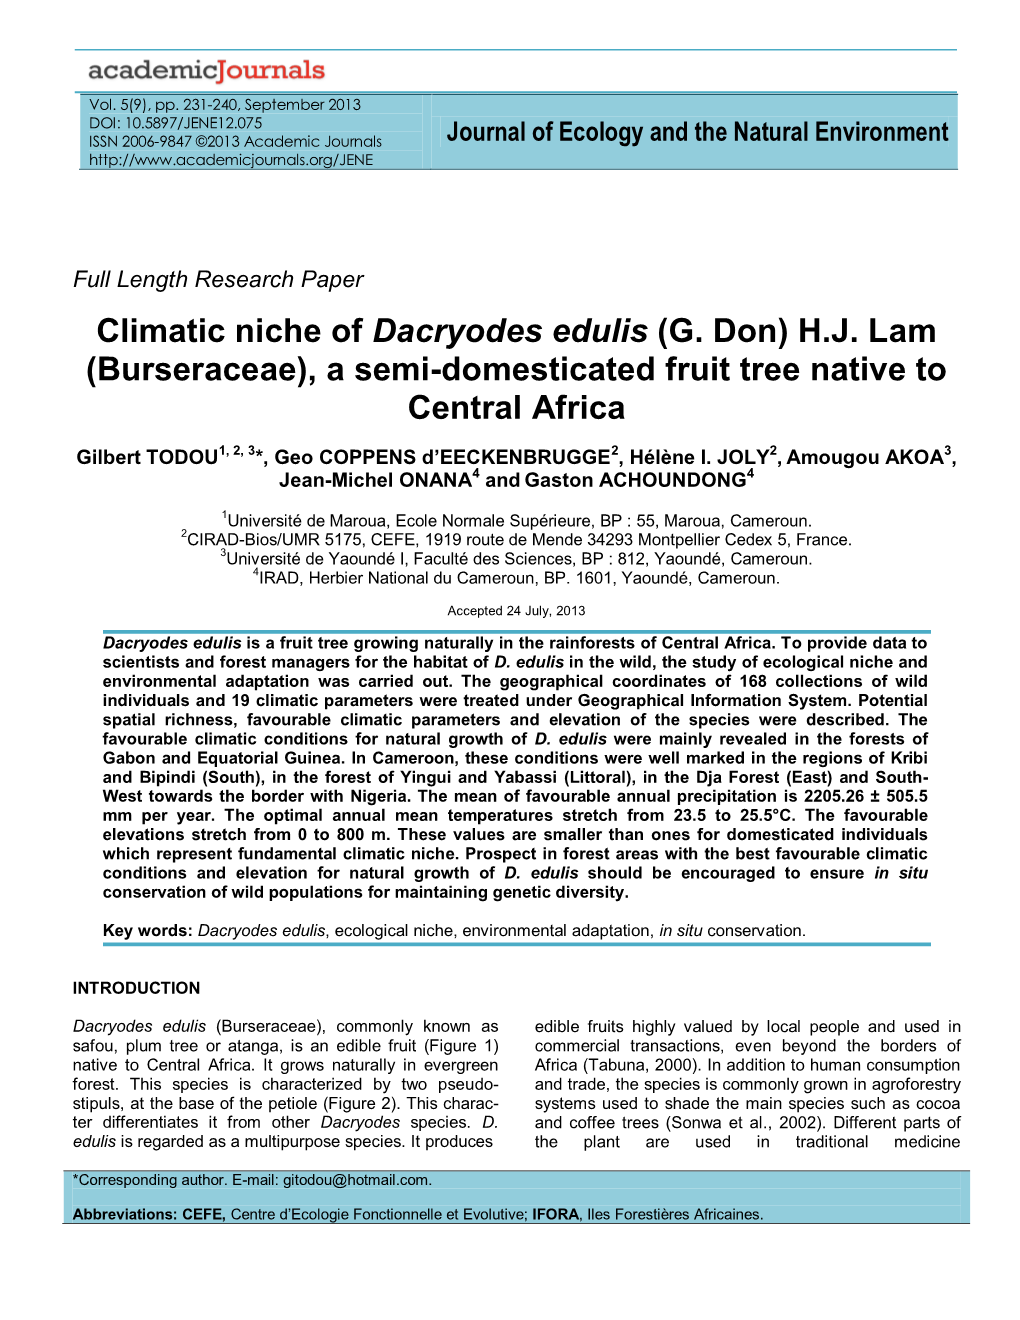 Climatic Niche of Dacryodes Edulis (G